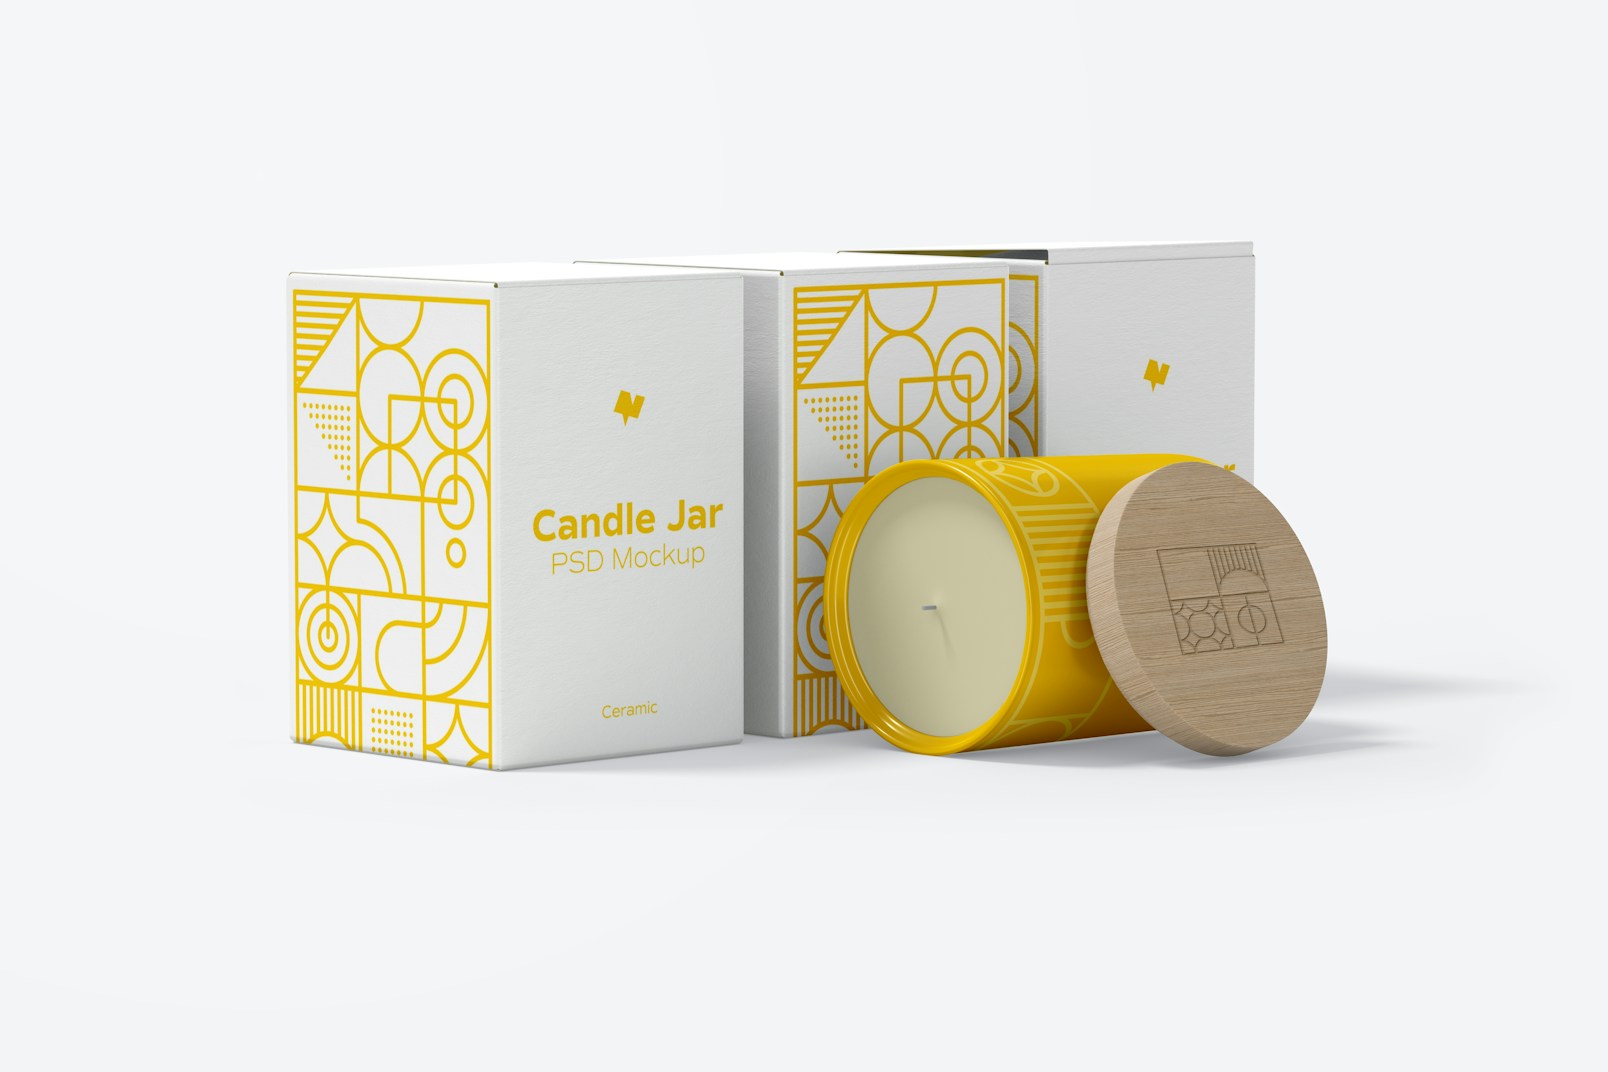 Ceramic Candle Jar with Boxes Set Mockup, Side View